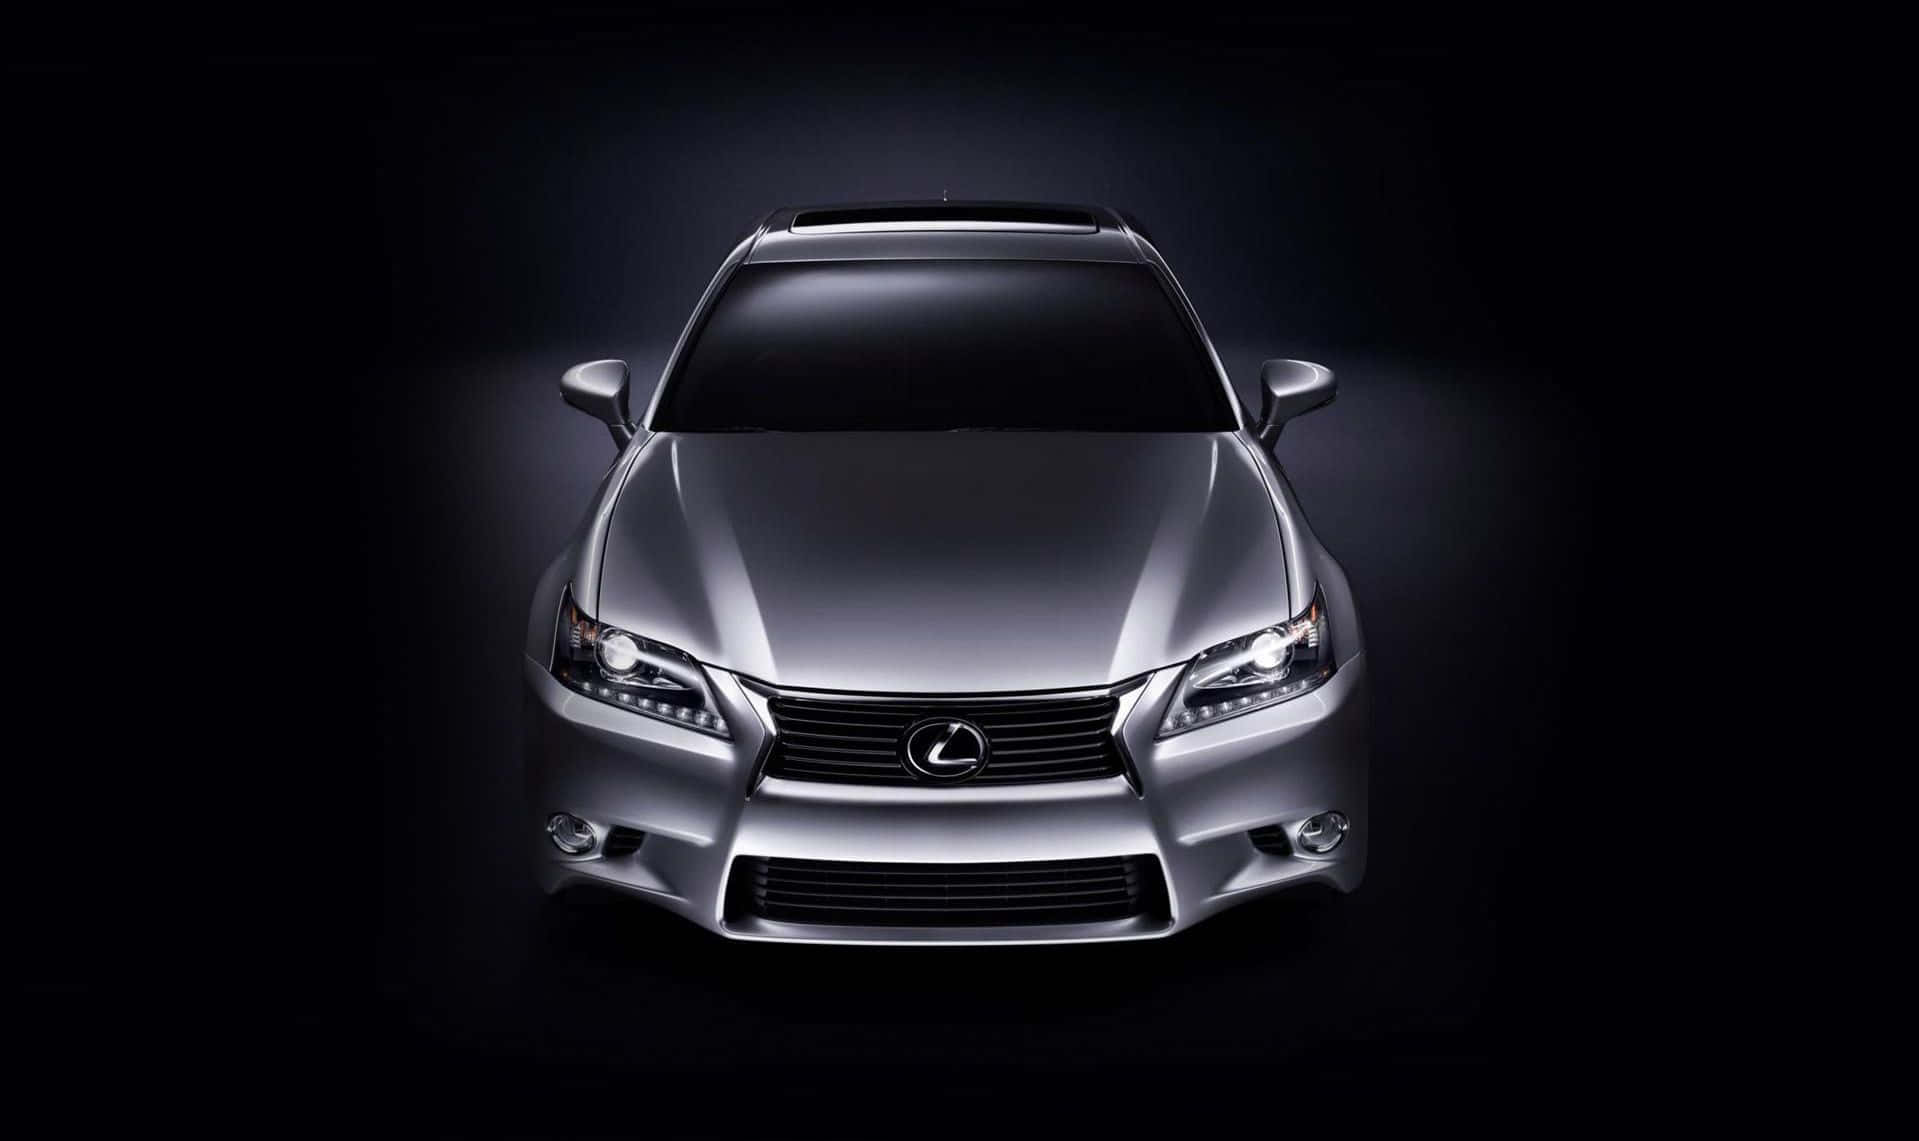 Experience powerful elegance with the Lexus GS. Wallpaper